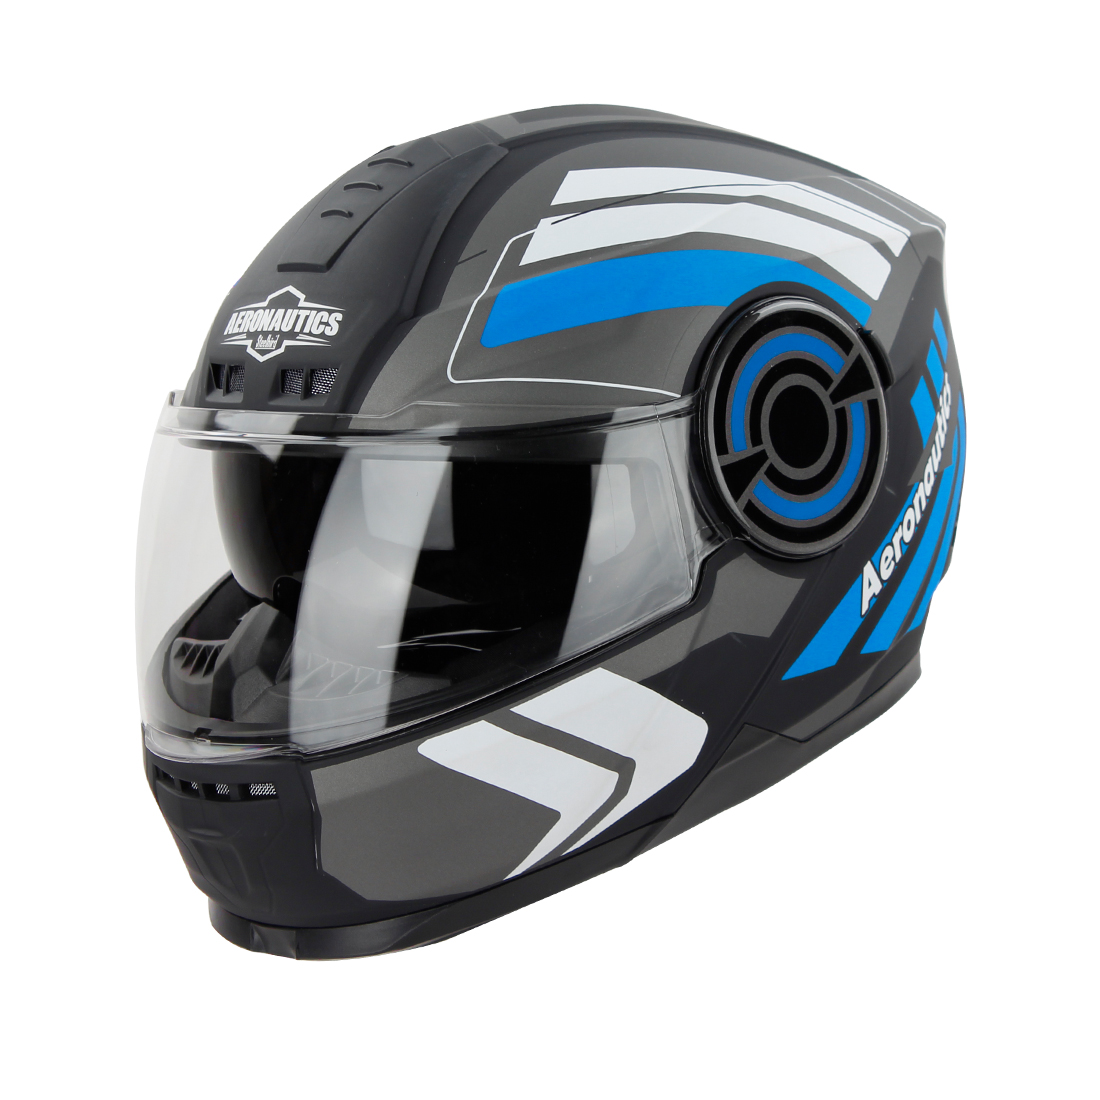 Steelbird SBH-40 Vanguard ISI Certified Full Face Graphic Helmet For Men And Women With Inner Sun Shield (Glossy Black Blue)